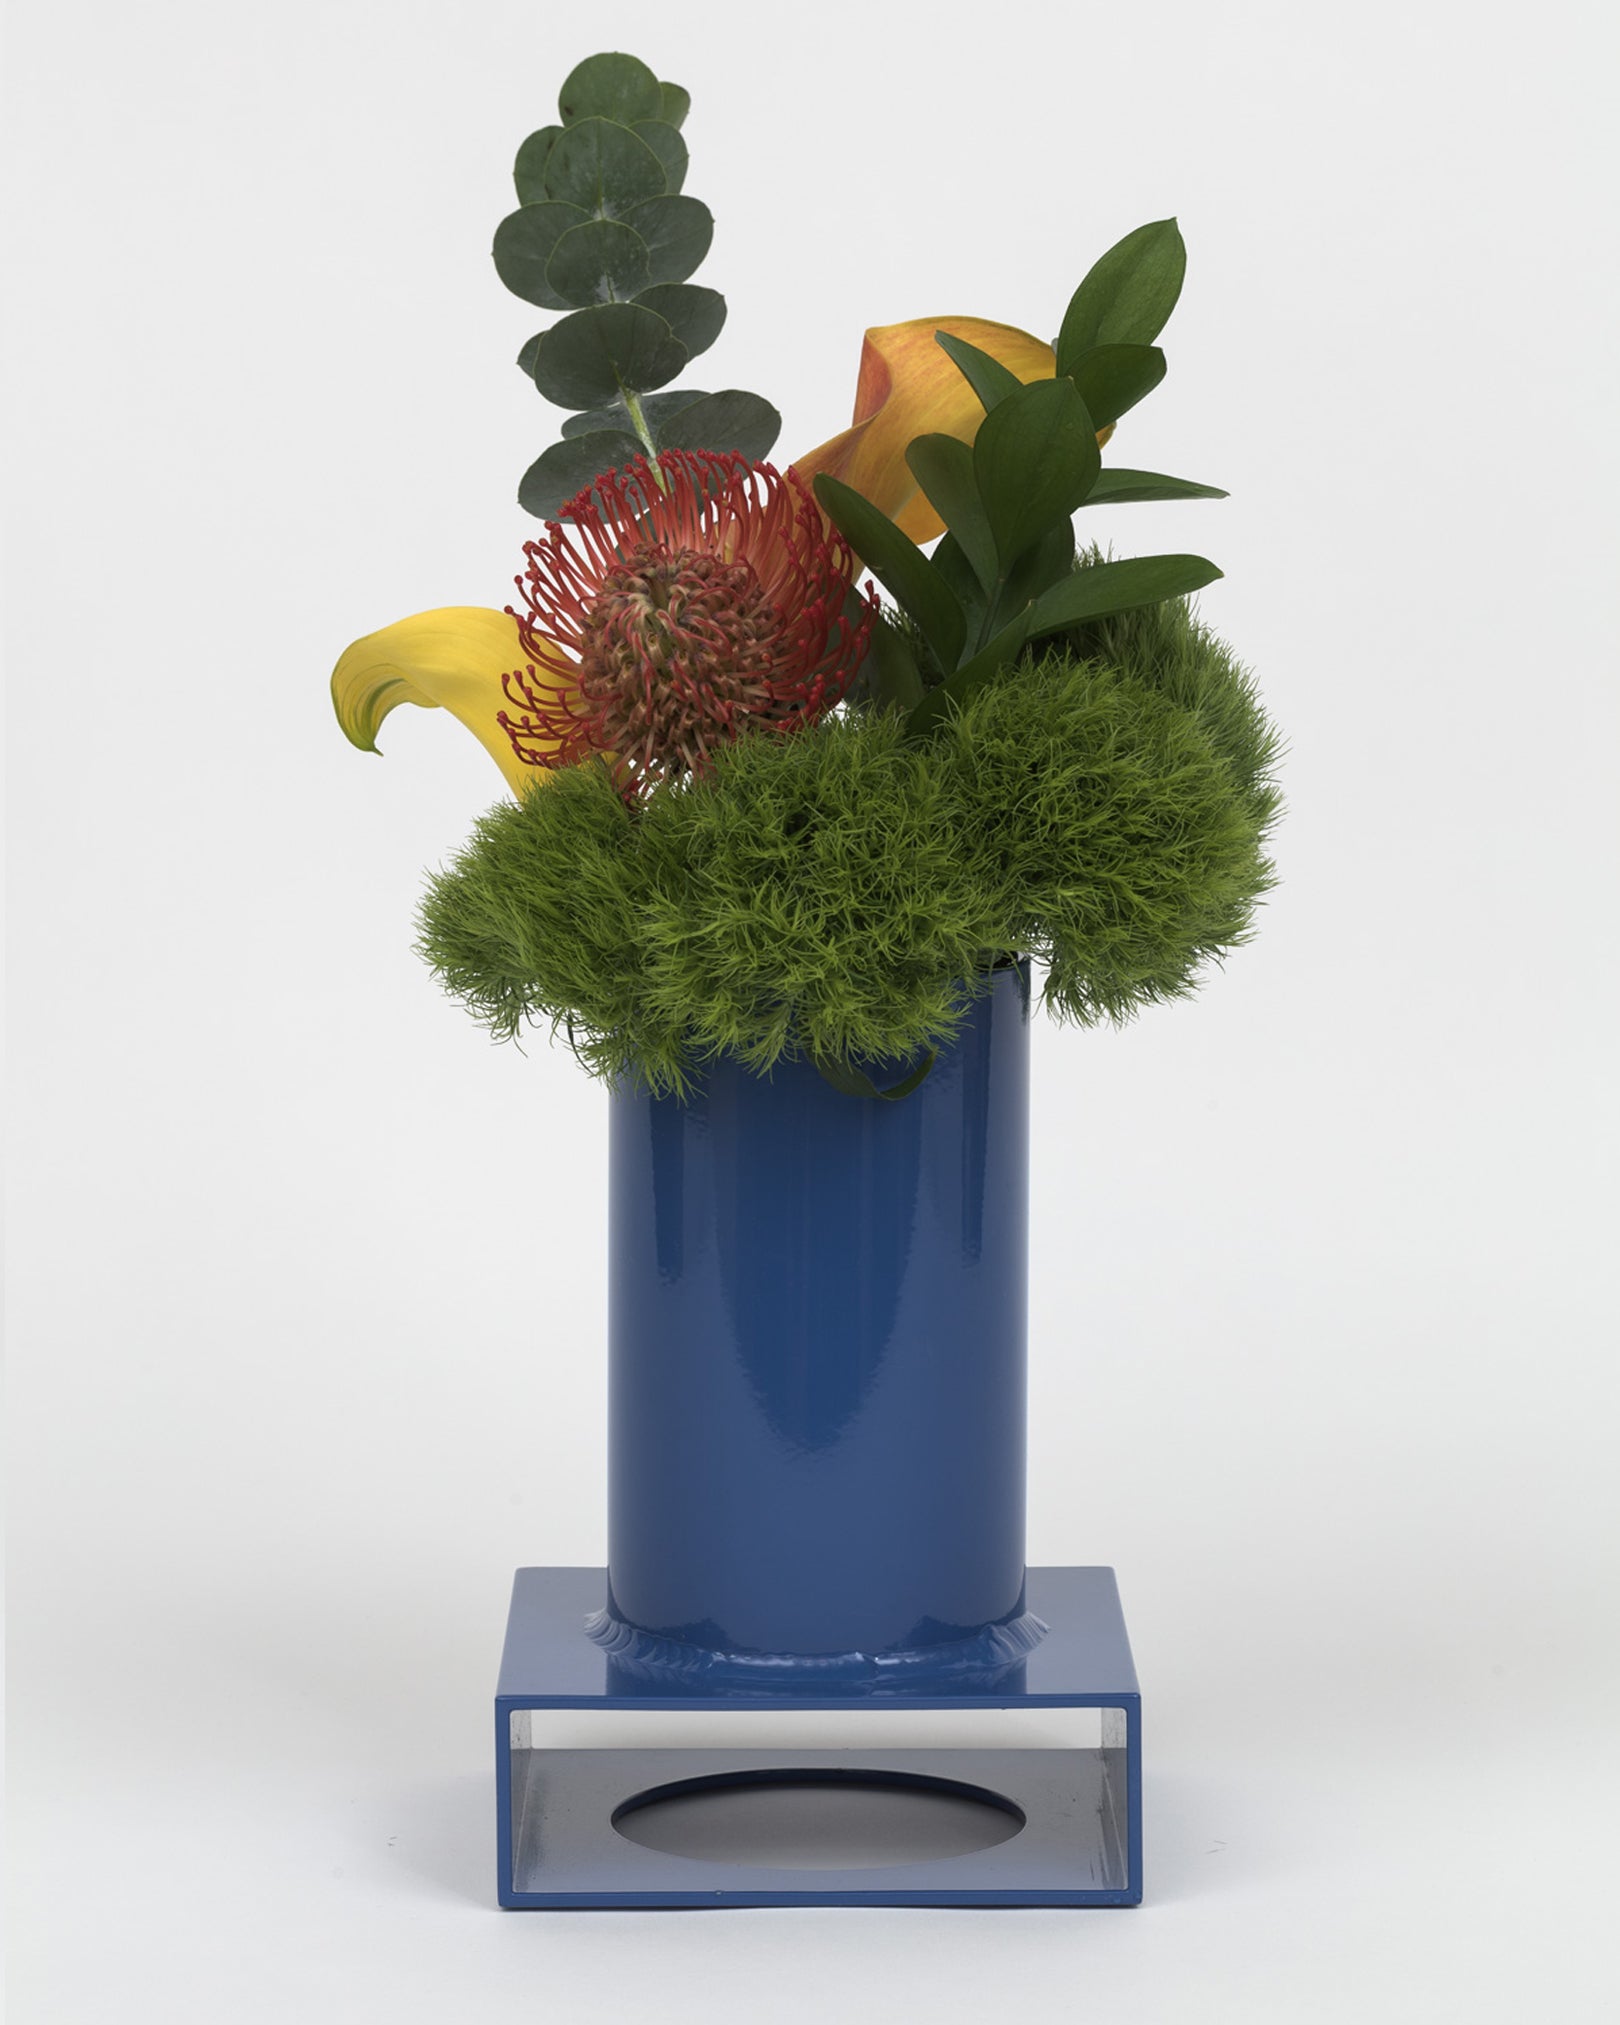 NICE CONDO Brute Tube Vase 002 in Deep Adult Blue available at Lahn.shop